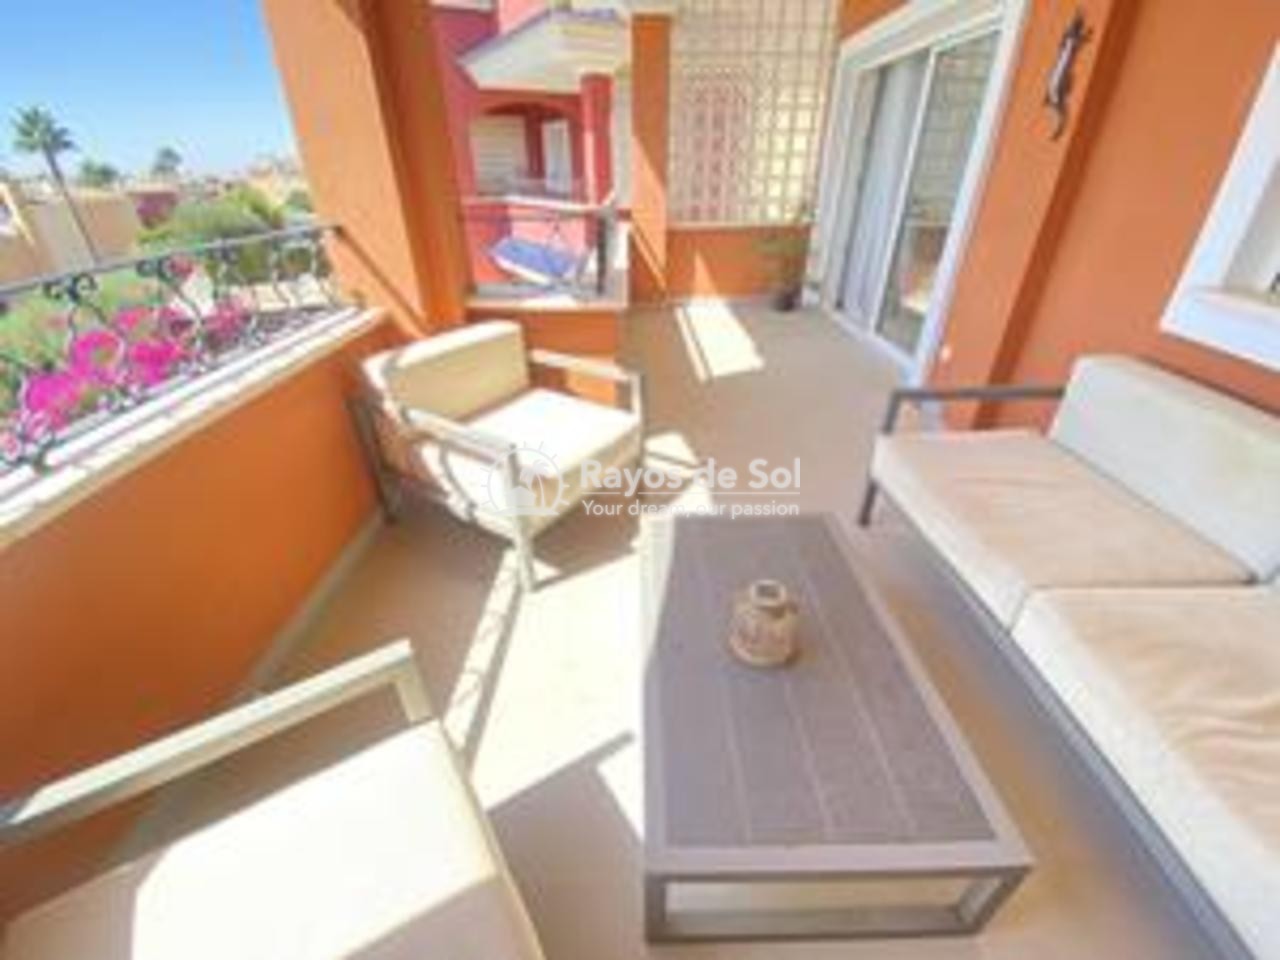 Apartment  in Altaona Golf and Country Village, Costa Cálida (svm670017-1) - 24